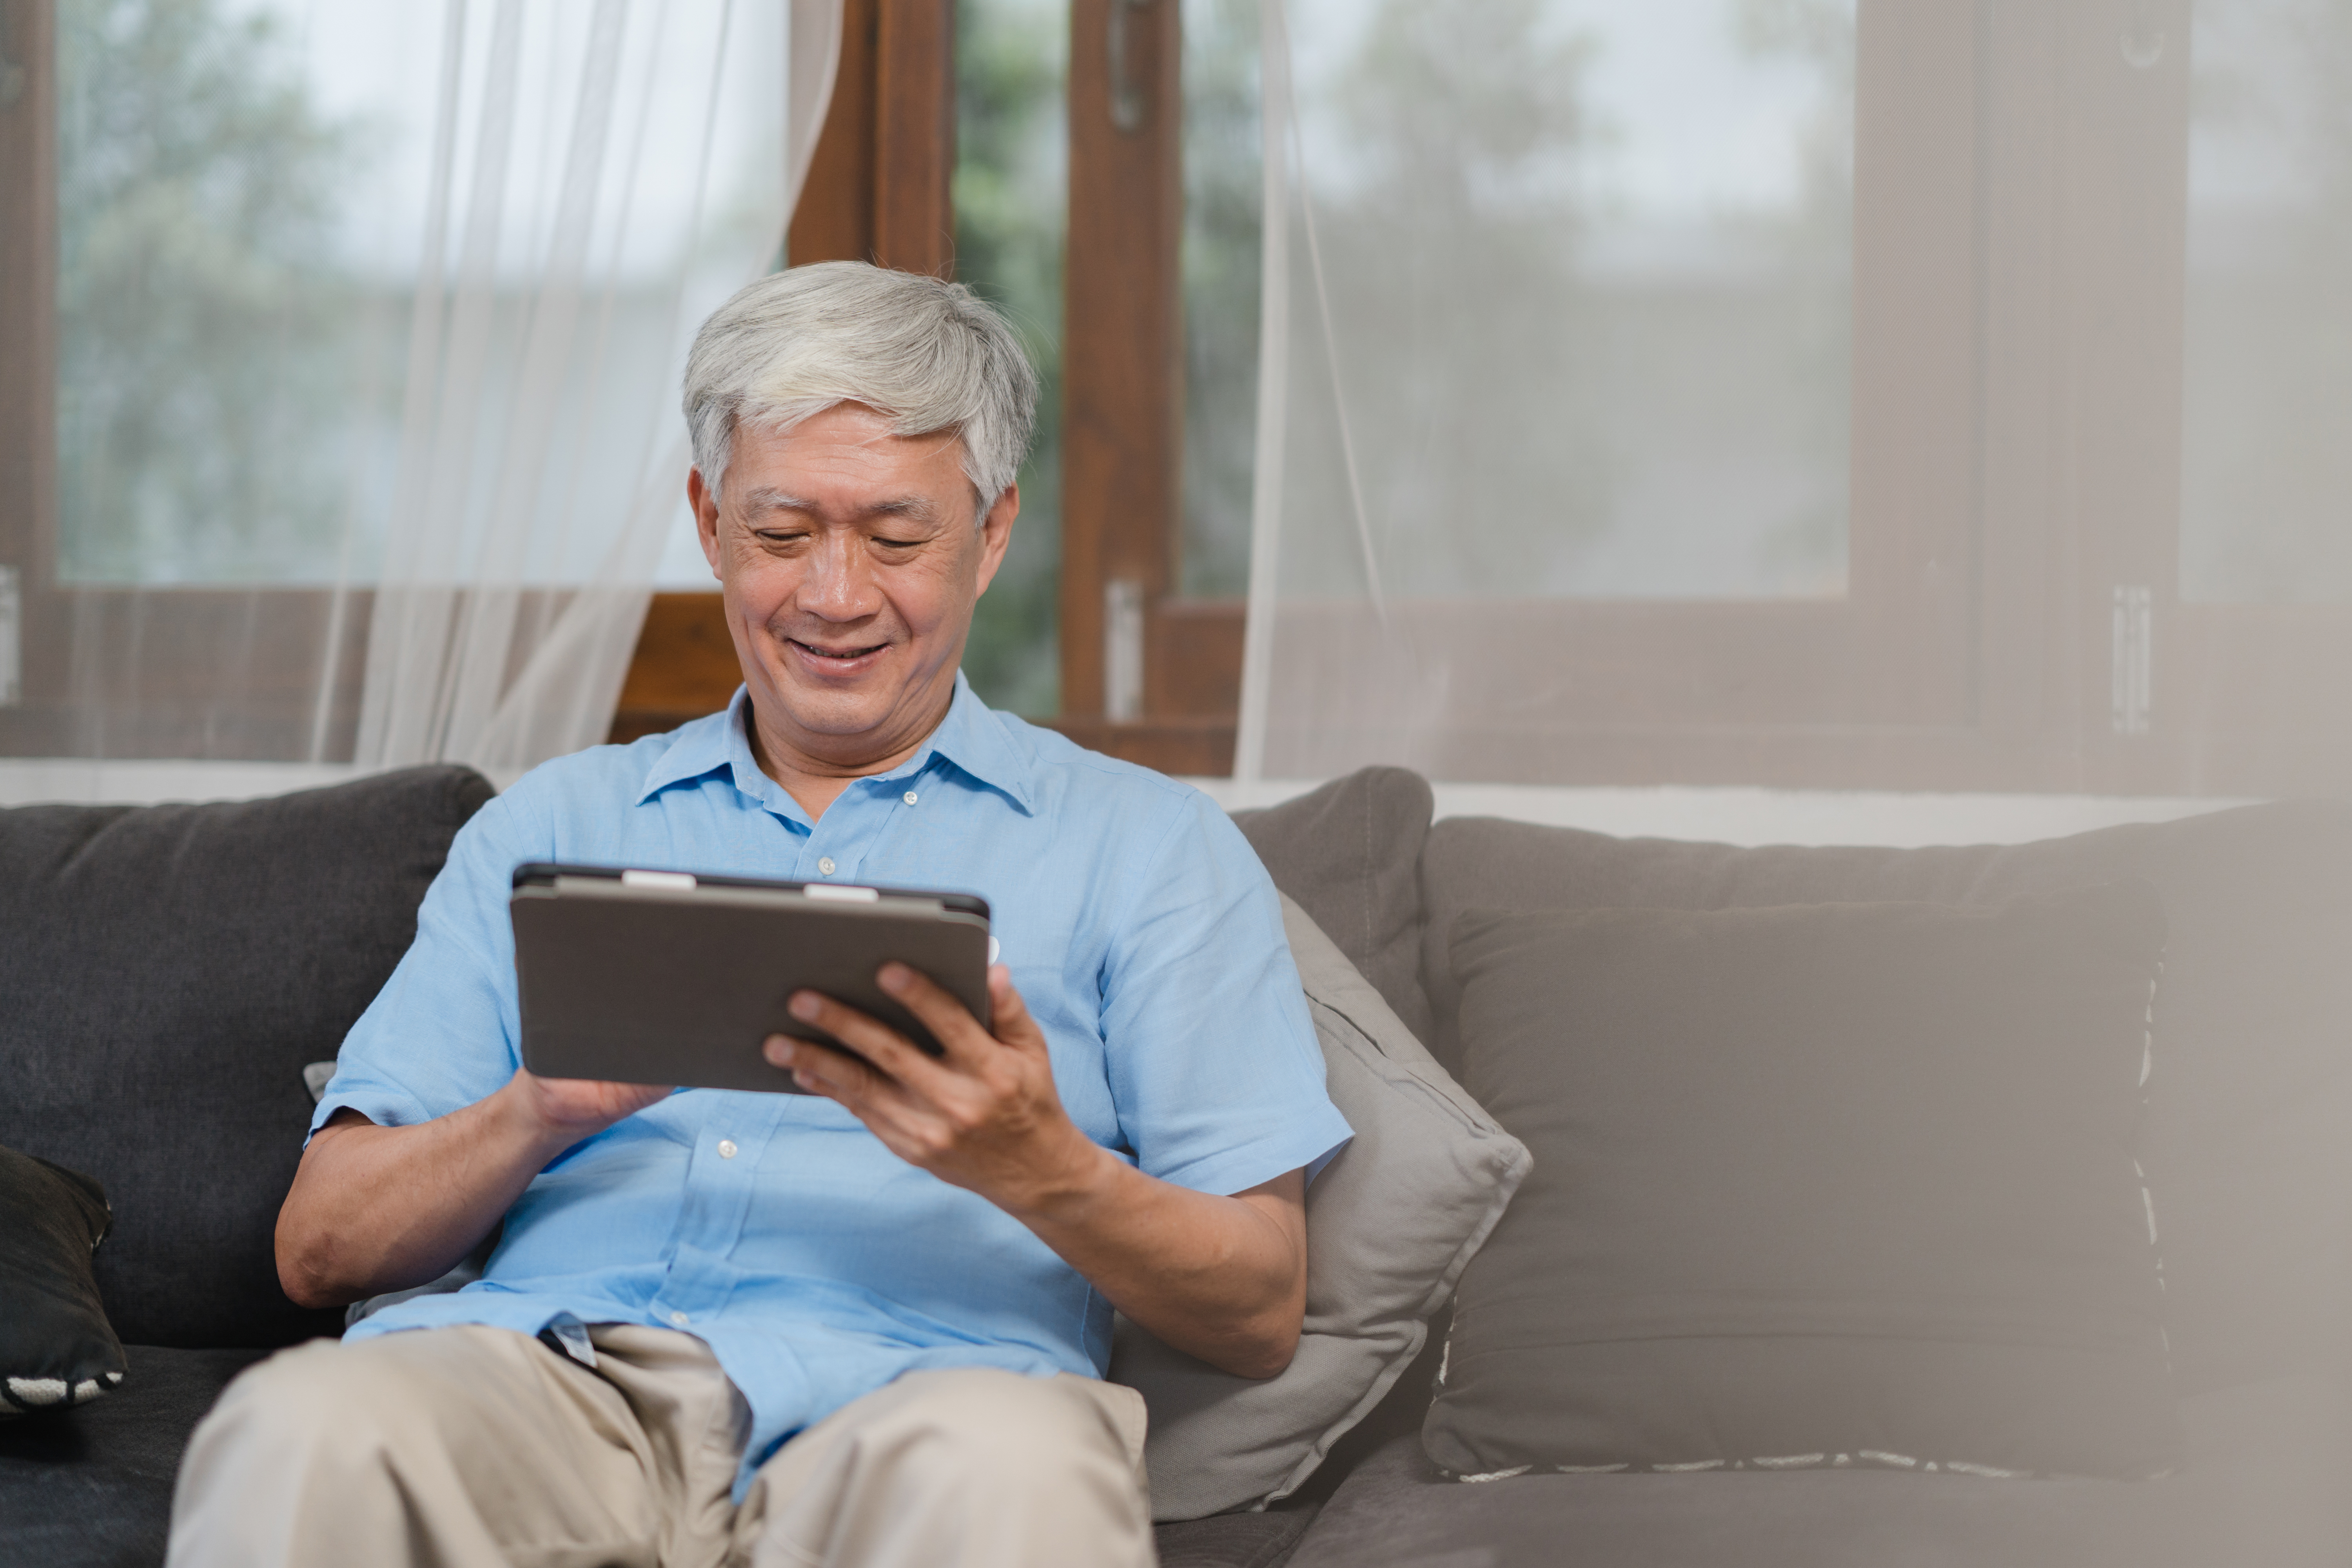 https://img.moneyduck.com/article_attachment/1671171907-asian-senior-men-using-tablet-home-asian-senior-chinese-male-search-information-about-how-good-health-internet-while-lying-sofa-living-room-home-concept.jpg